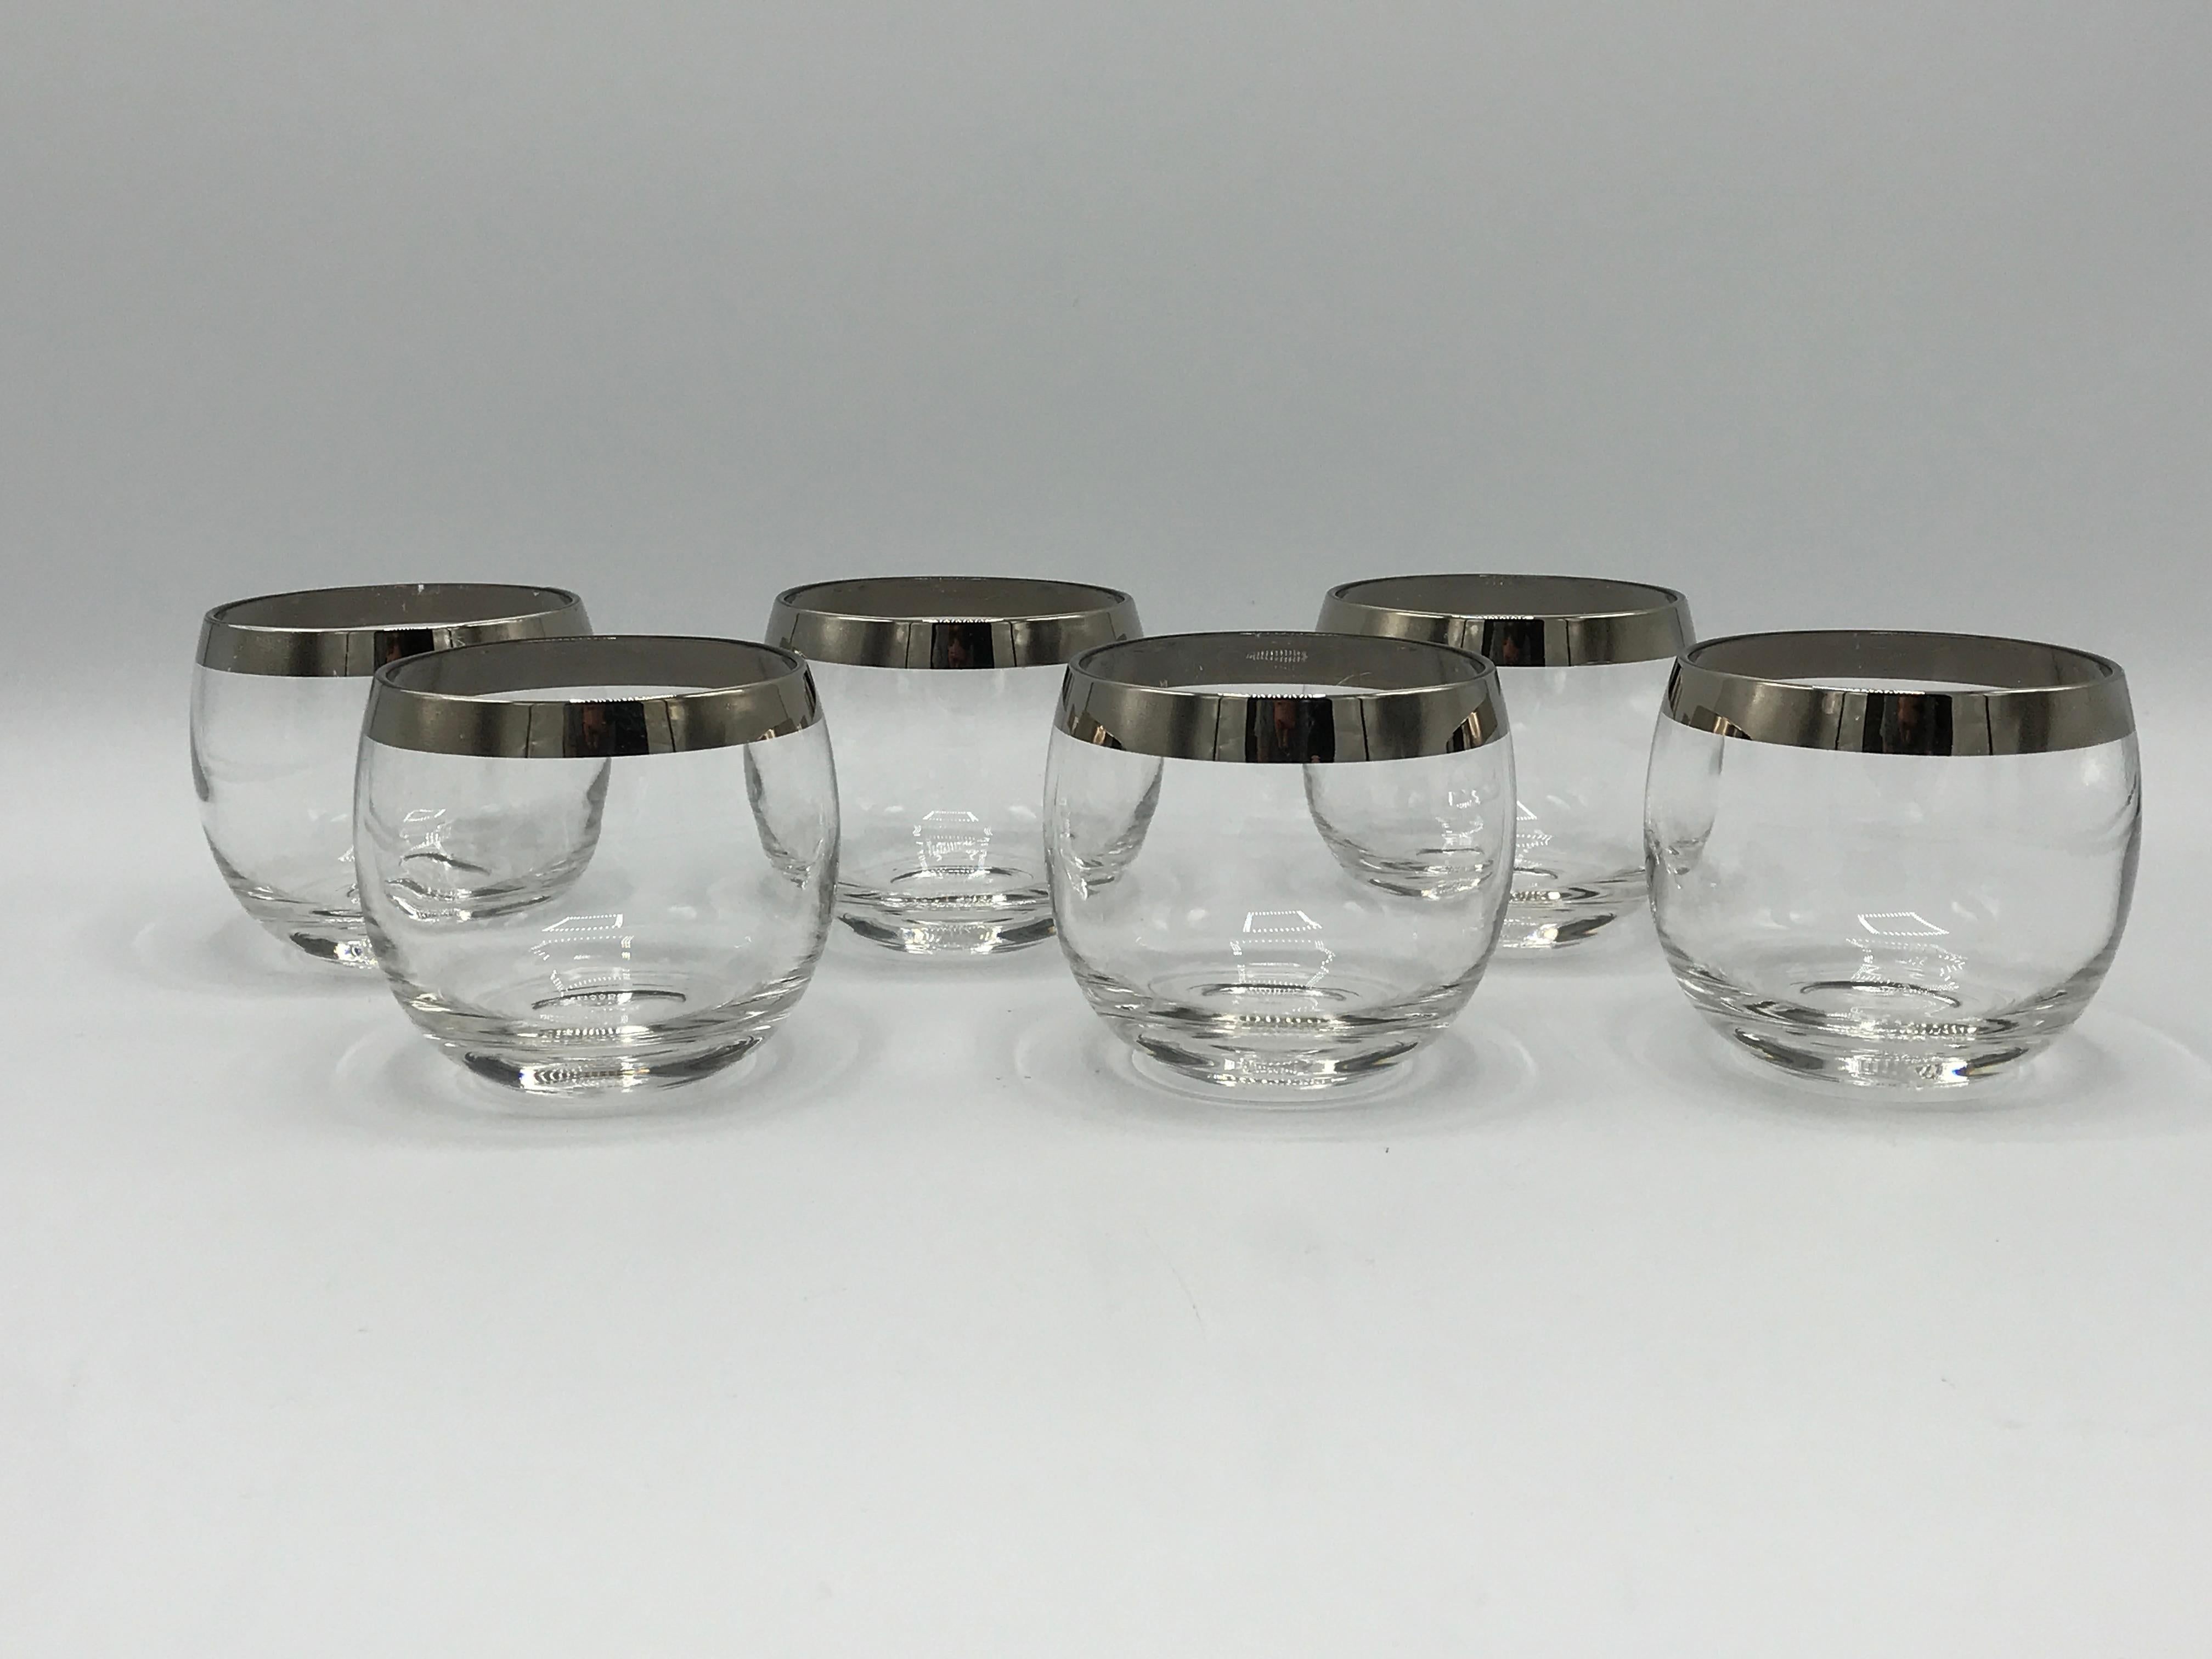 Offered is a beautiful, set of six, 1970s Dorothy Thorpe stemless cocktail glasses. The set has a minimal, yet striking silver rim along the lip of each glass.